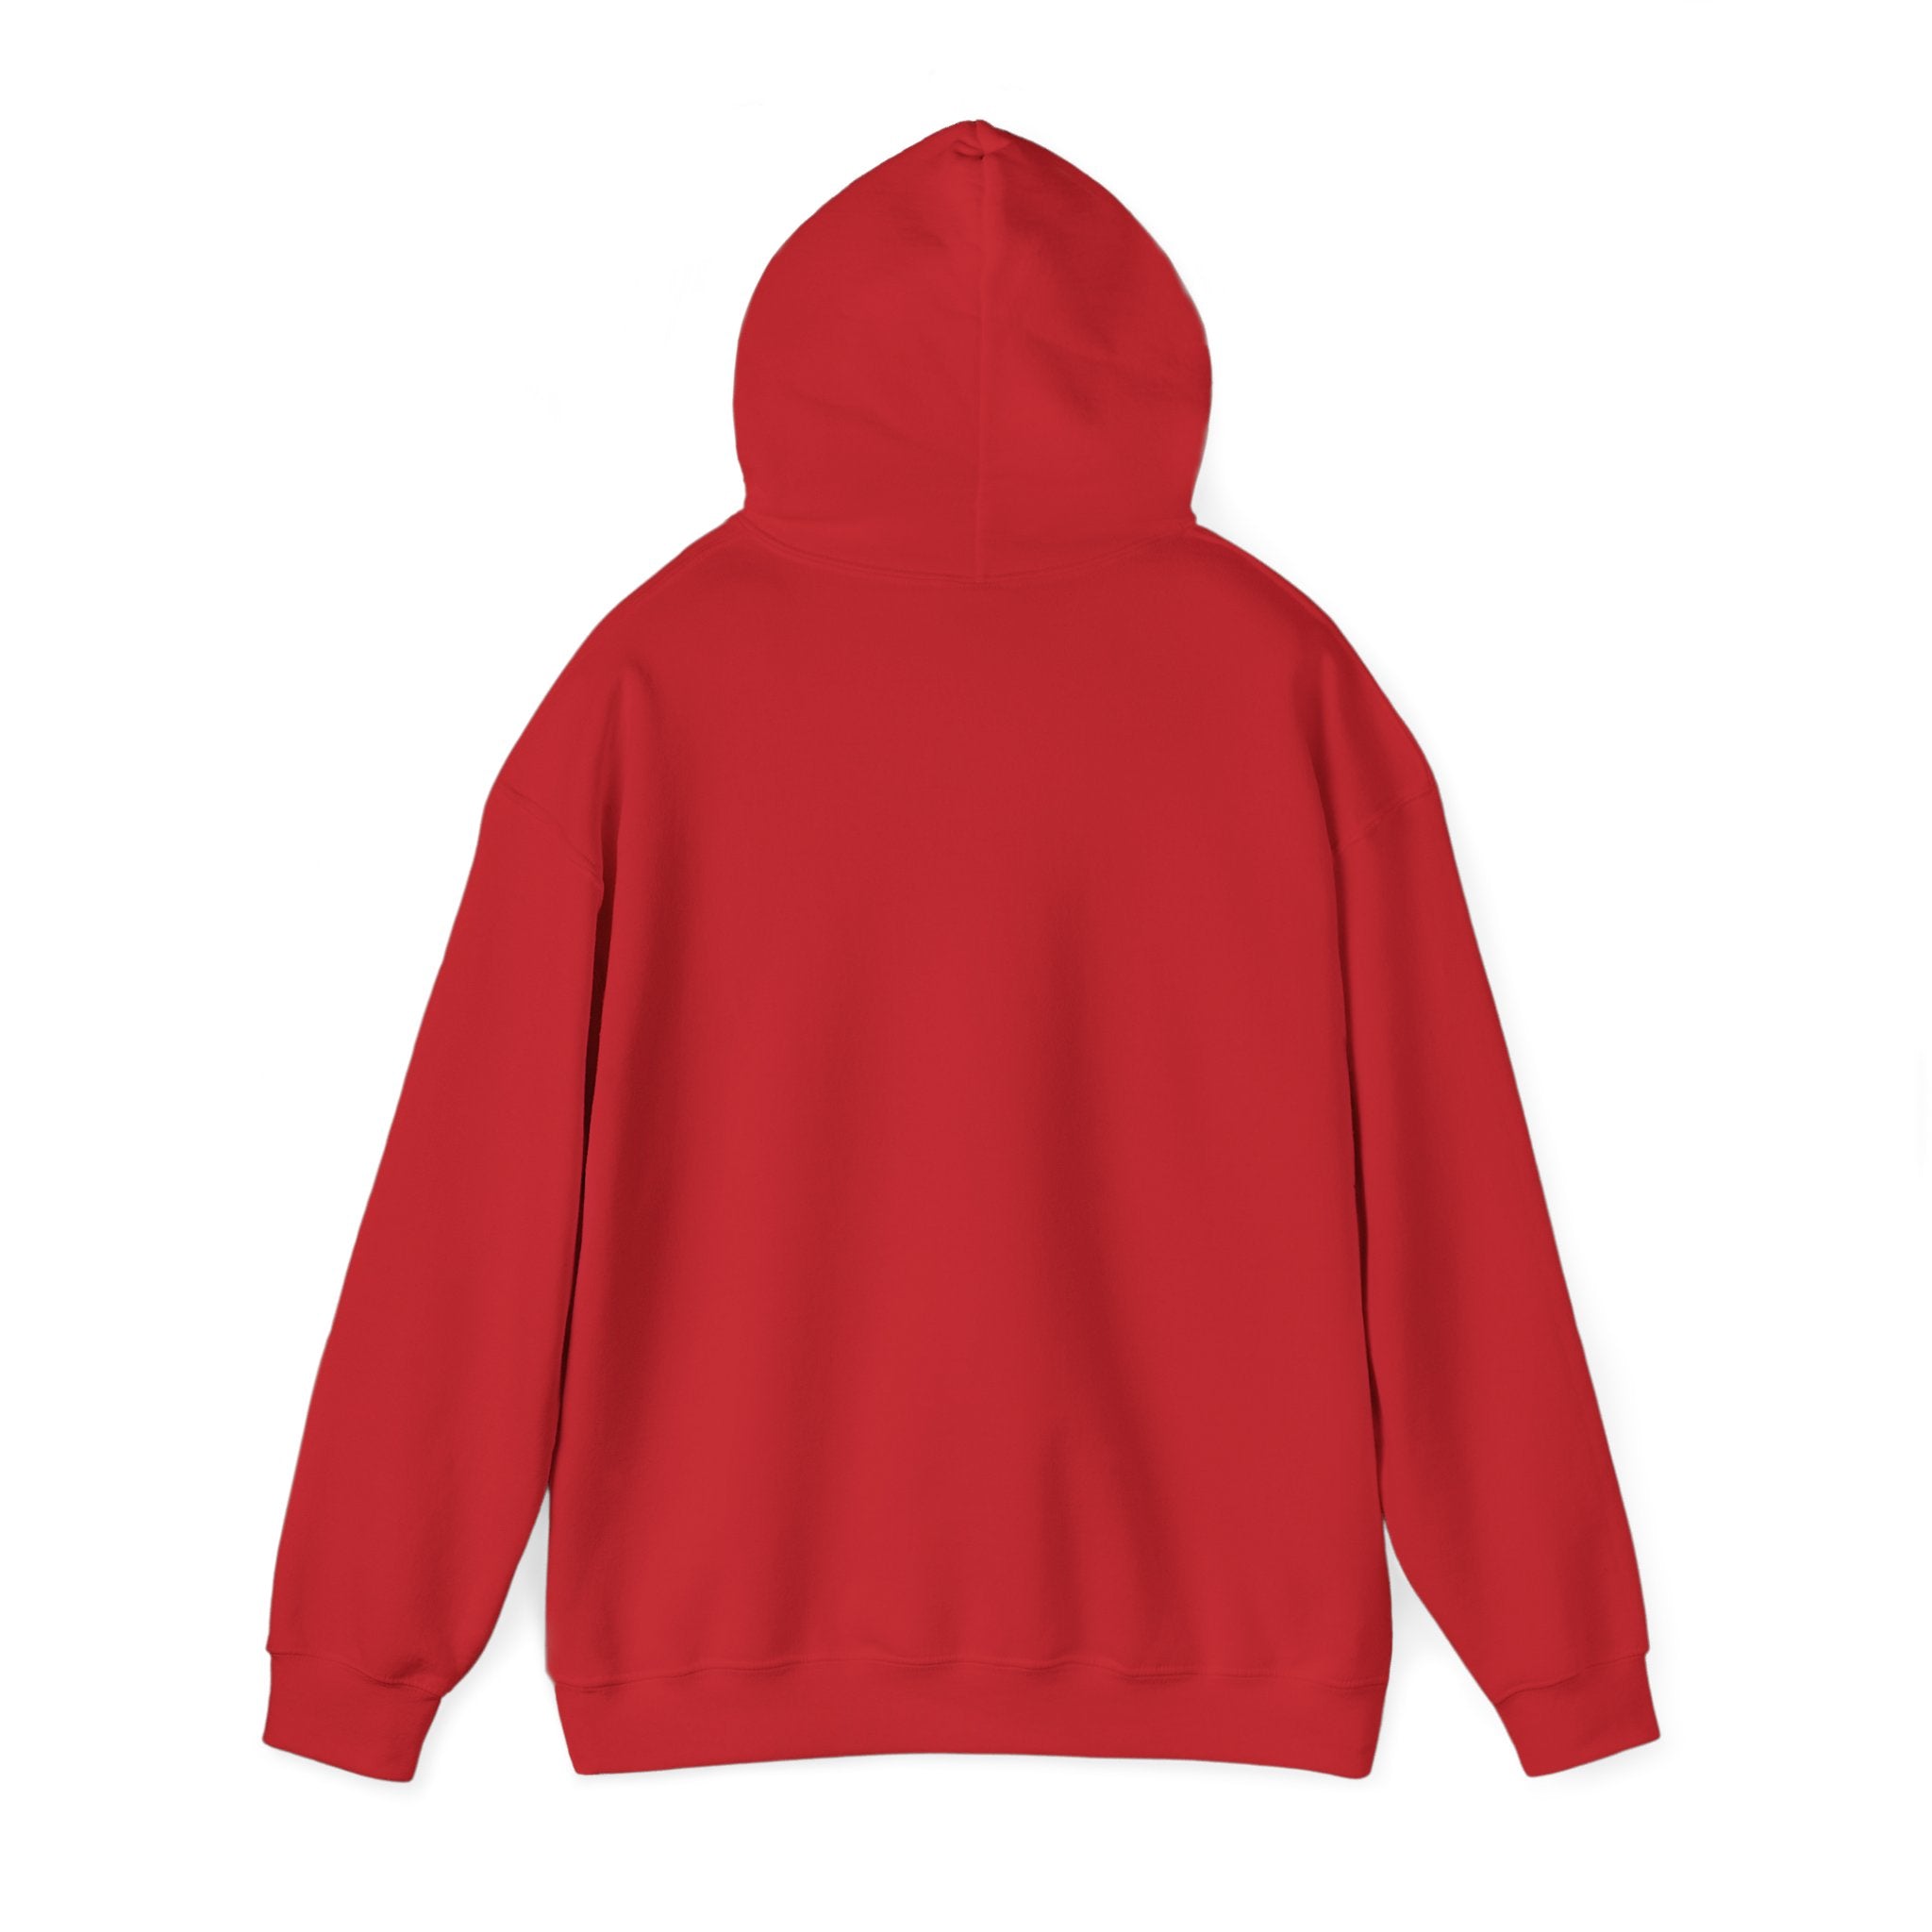 The RU - Hooded Sweatshirt is shown from the back, epitomizing style and ease with its plain design free of logos or text, offering ultimate comfort for any occasion.